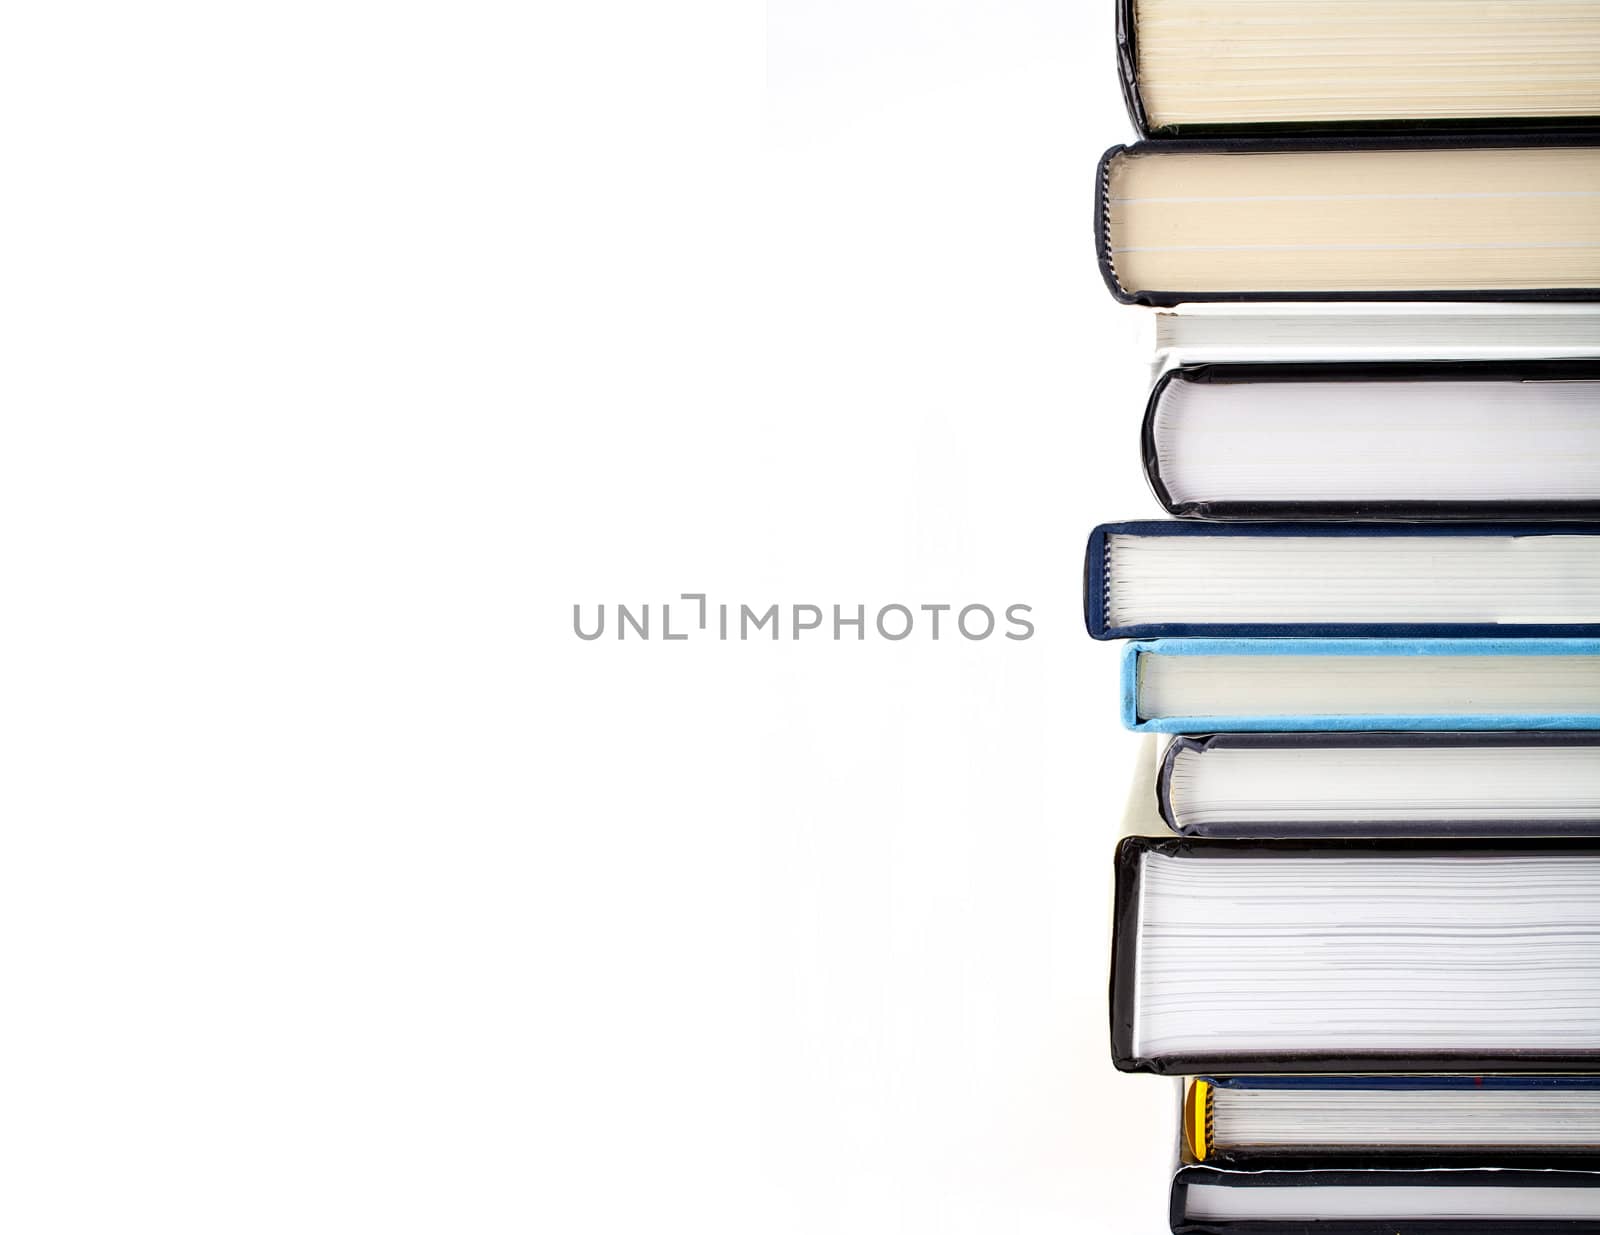 Abstract shot of a pile of Books over a white background.